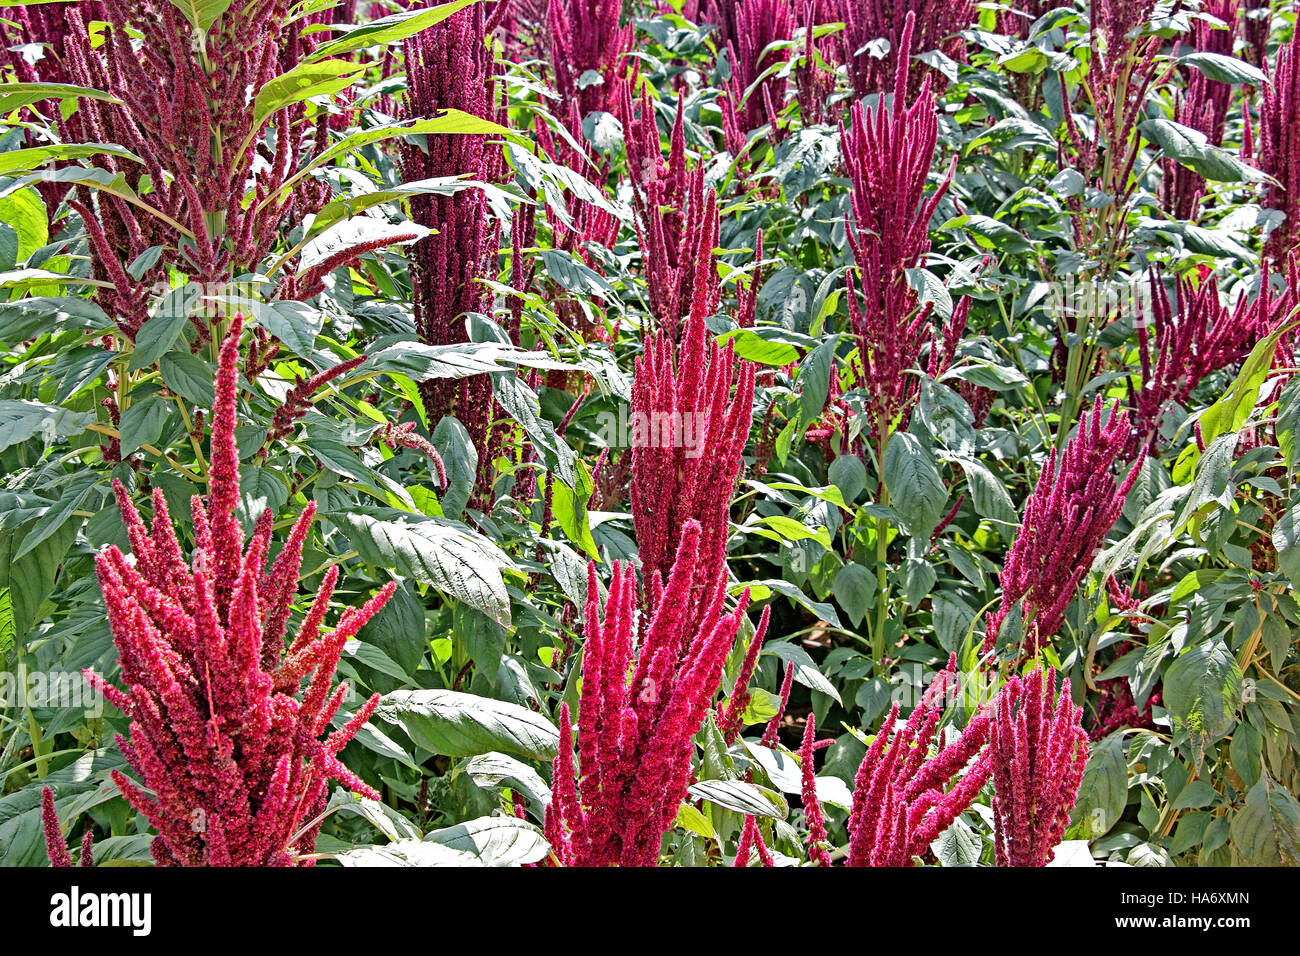 Indian green amaranth plants with red flowers in field. Amaranth is cultivated as leaf vegetables, cereals and ornamental plants. Genus is Amaranthus. Stock Photo